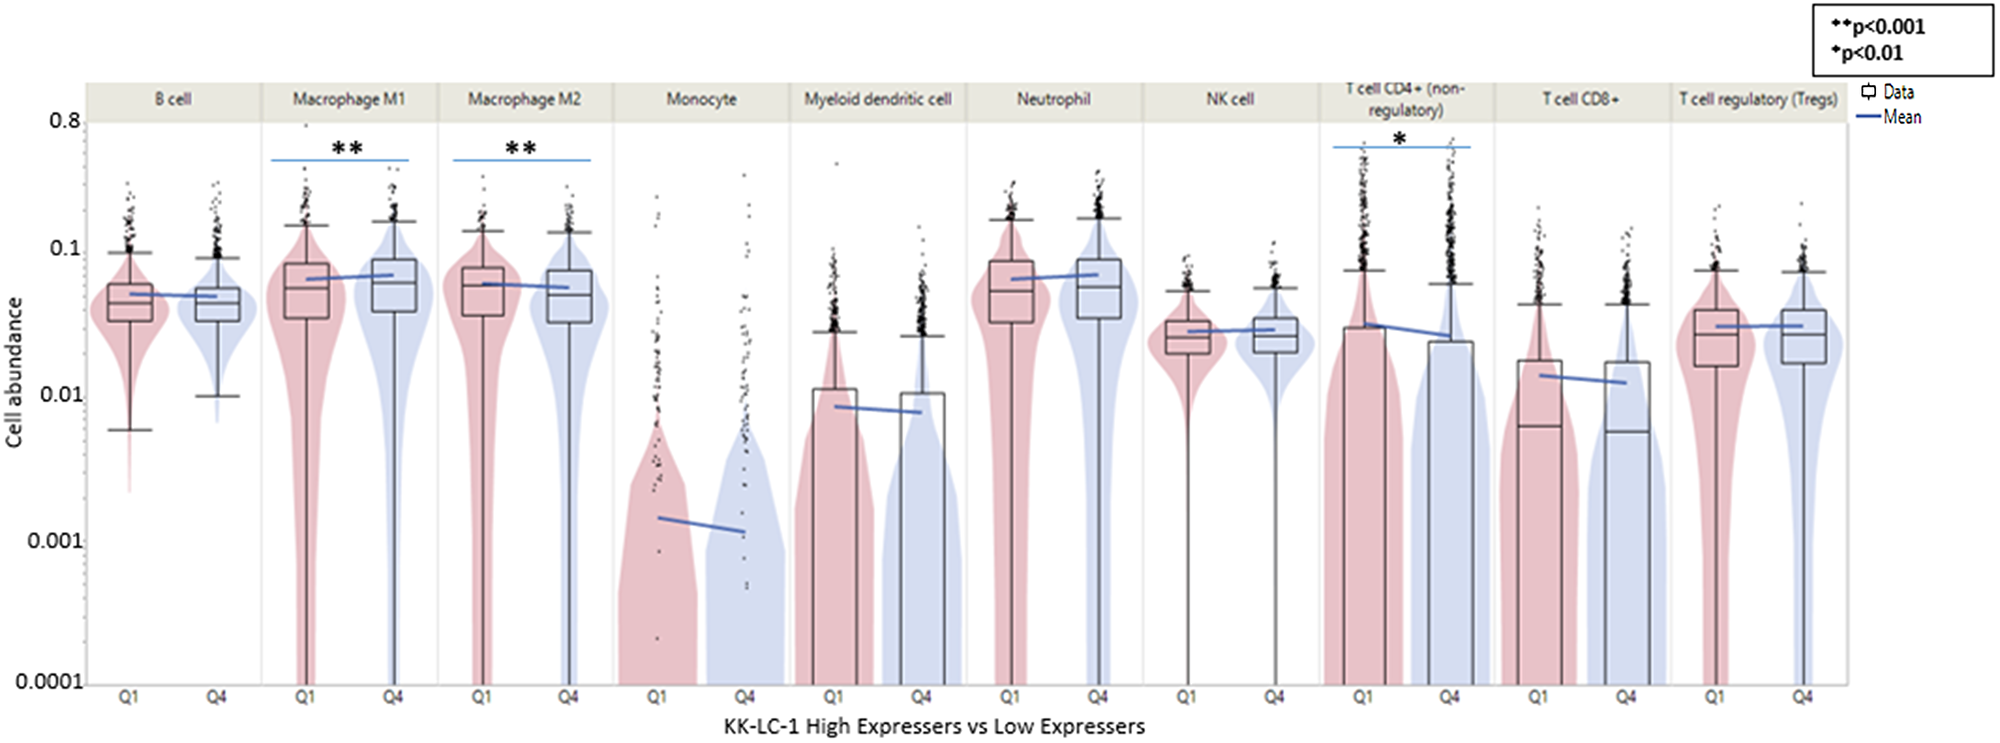 Tumor microenvironment in KK-LC-1 high vs low expressing (Q4 vs. Q1) in adenocarcinomas as measured by immune cell fraction calculated by QuantiSeq.